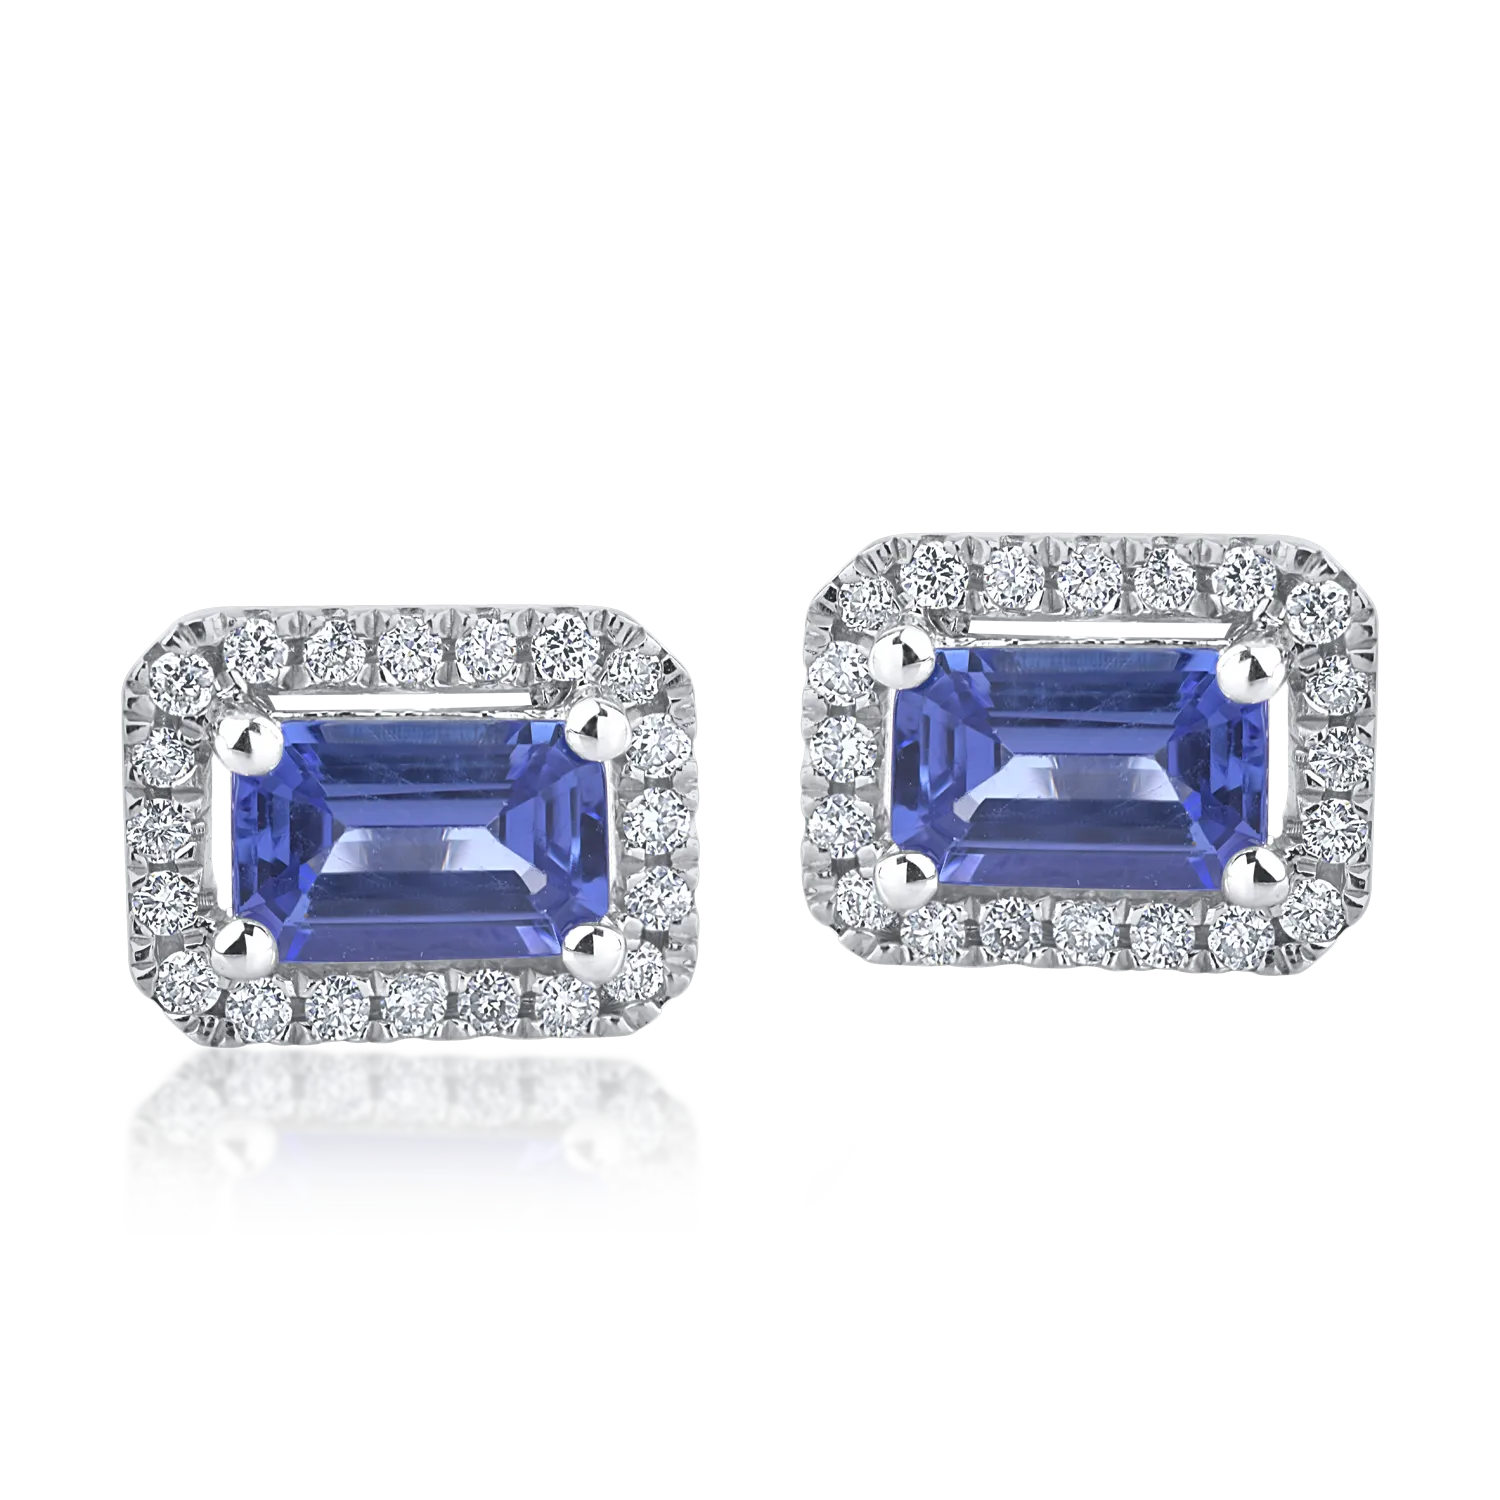 White gold earrings with 1.26ct tanzanites and 0.2ct diamonds